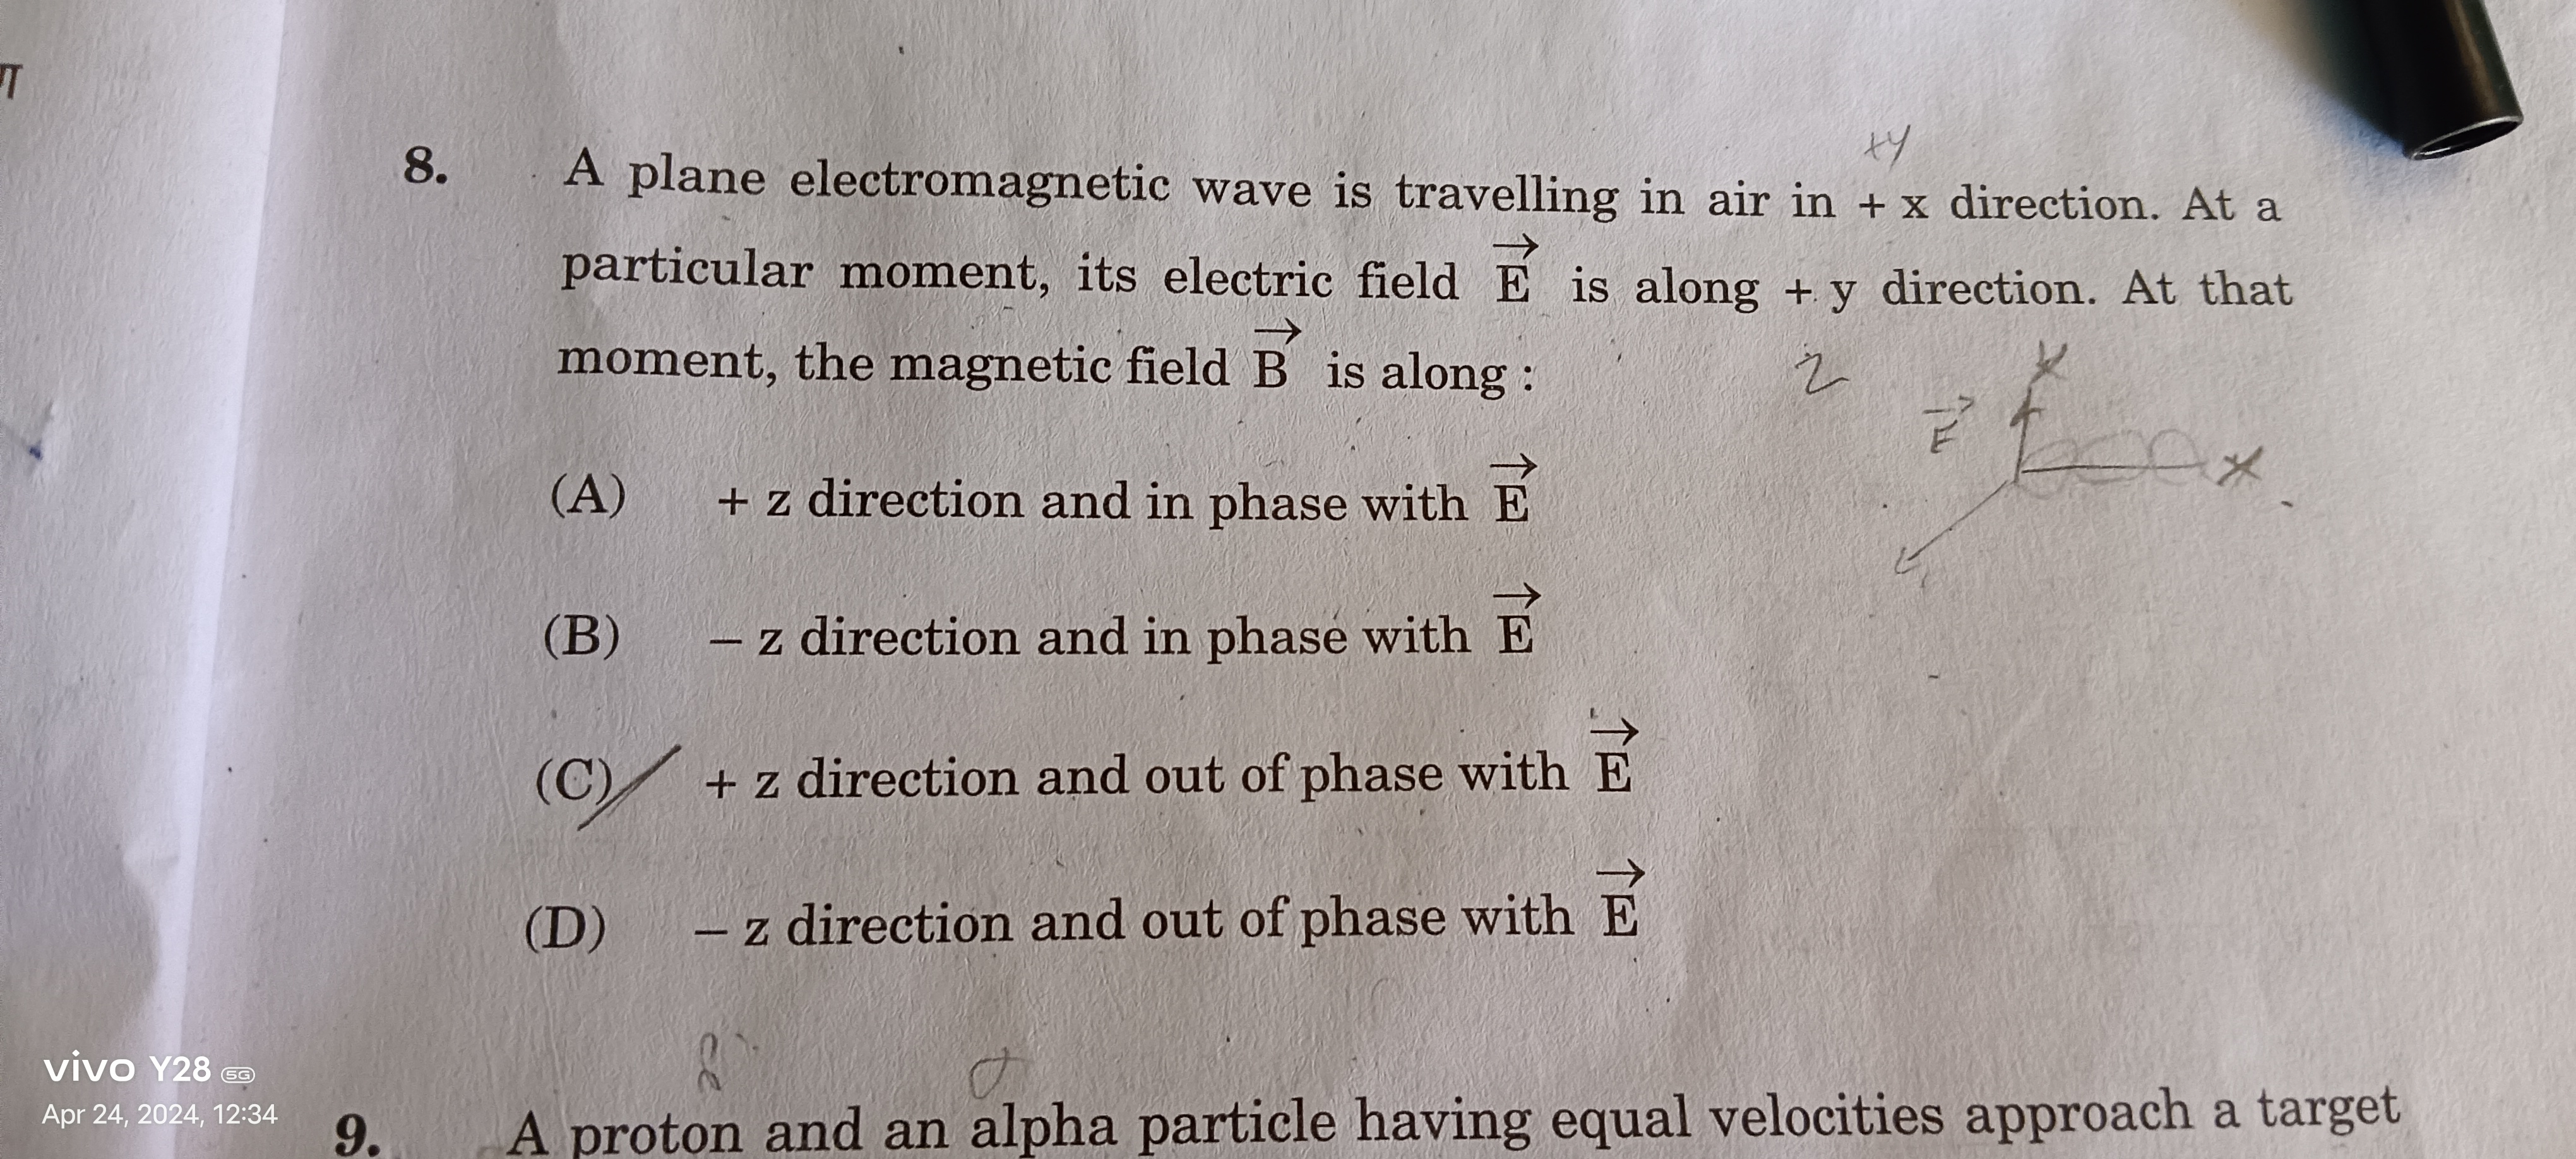 A plane electromagnetic wave is travelling in air in +x direction. At 